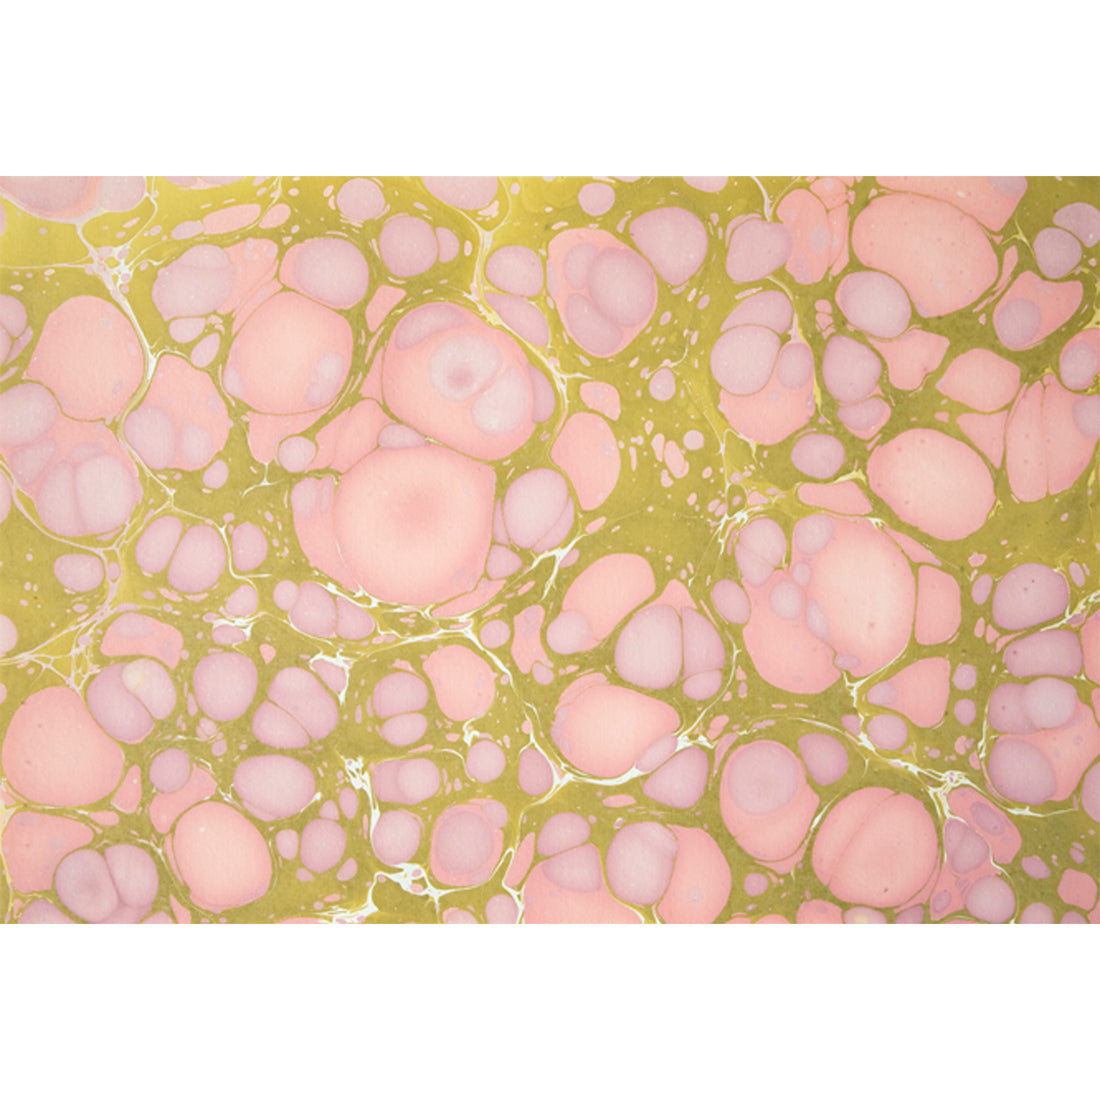 An abstract, marbled pattern of light pink bubbles surrounded by golden green.